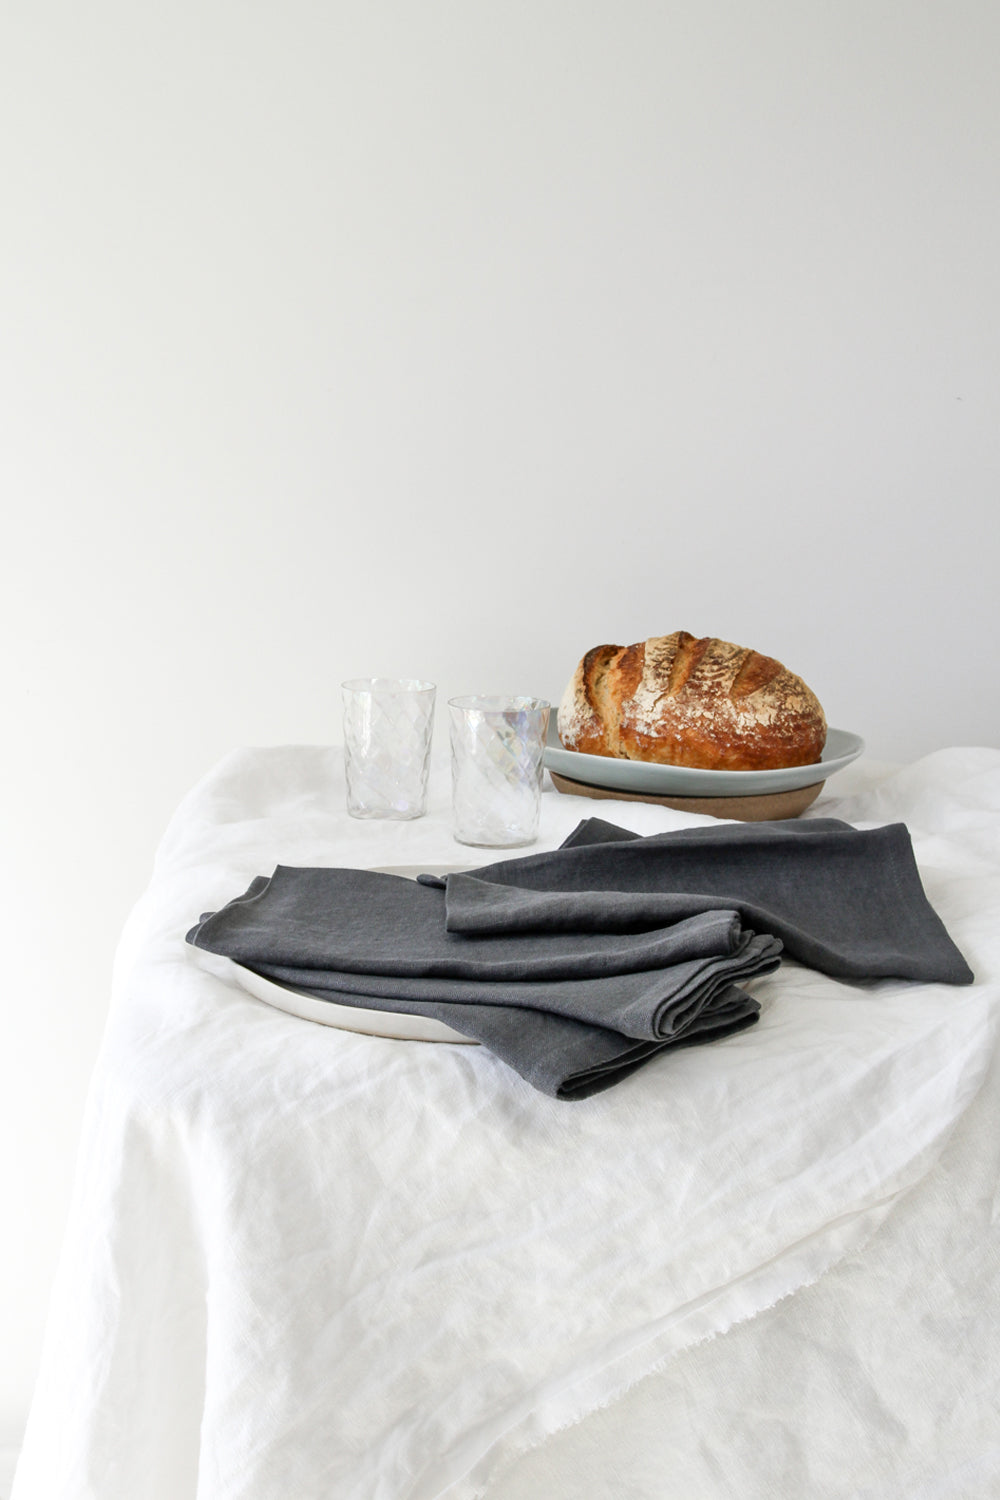 Charcoal Linen Napkins, Libbie Summers Label, Holiday Entertaining, Modern Chic Napkins